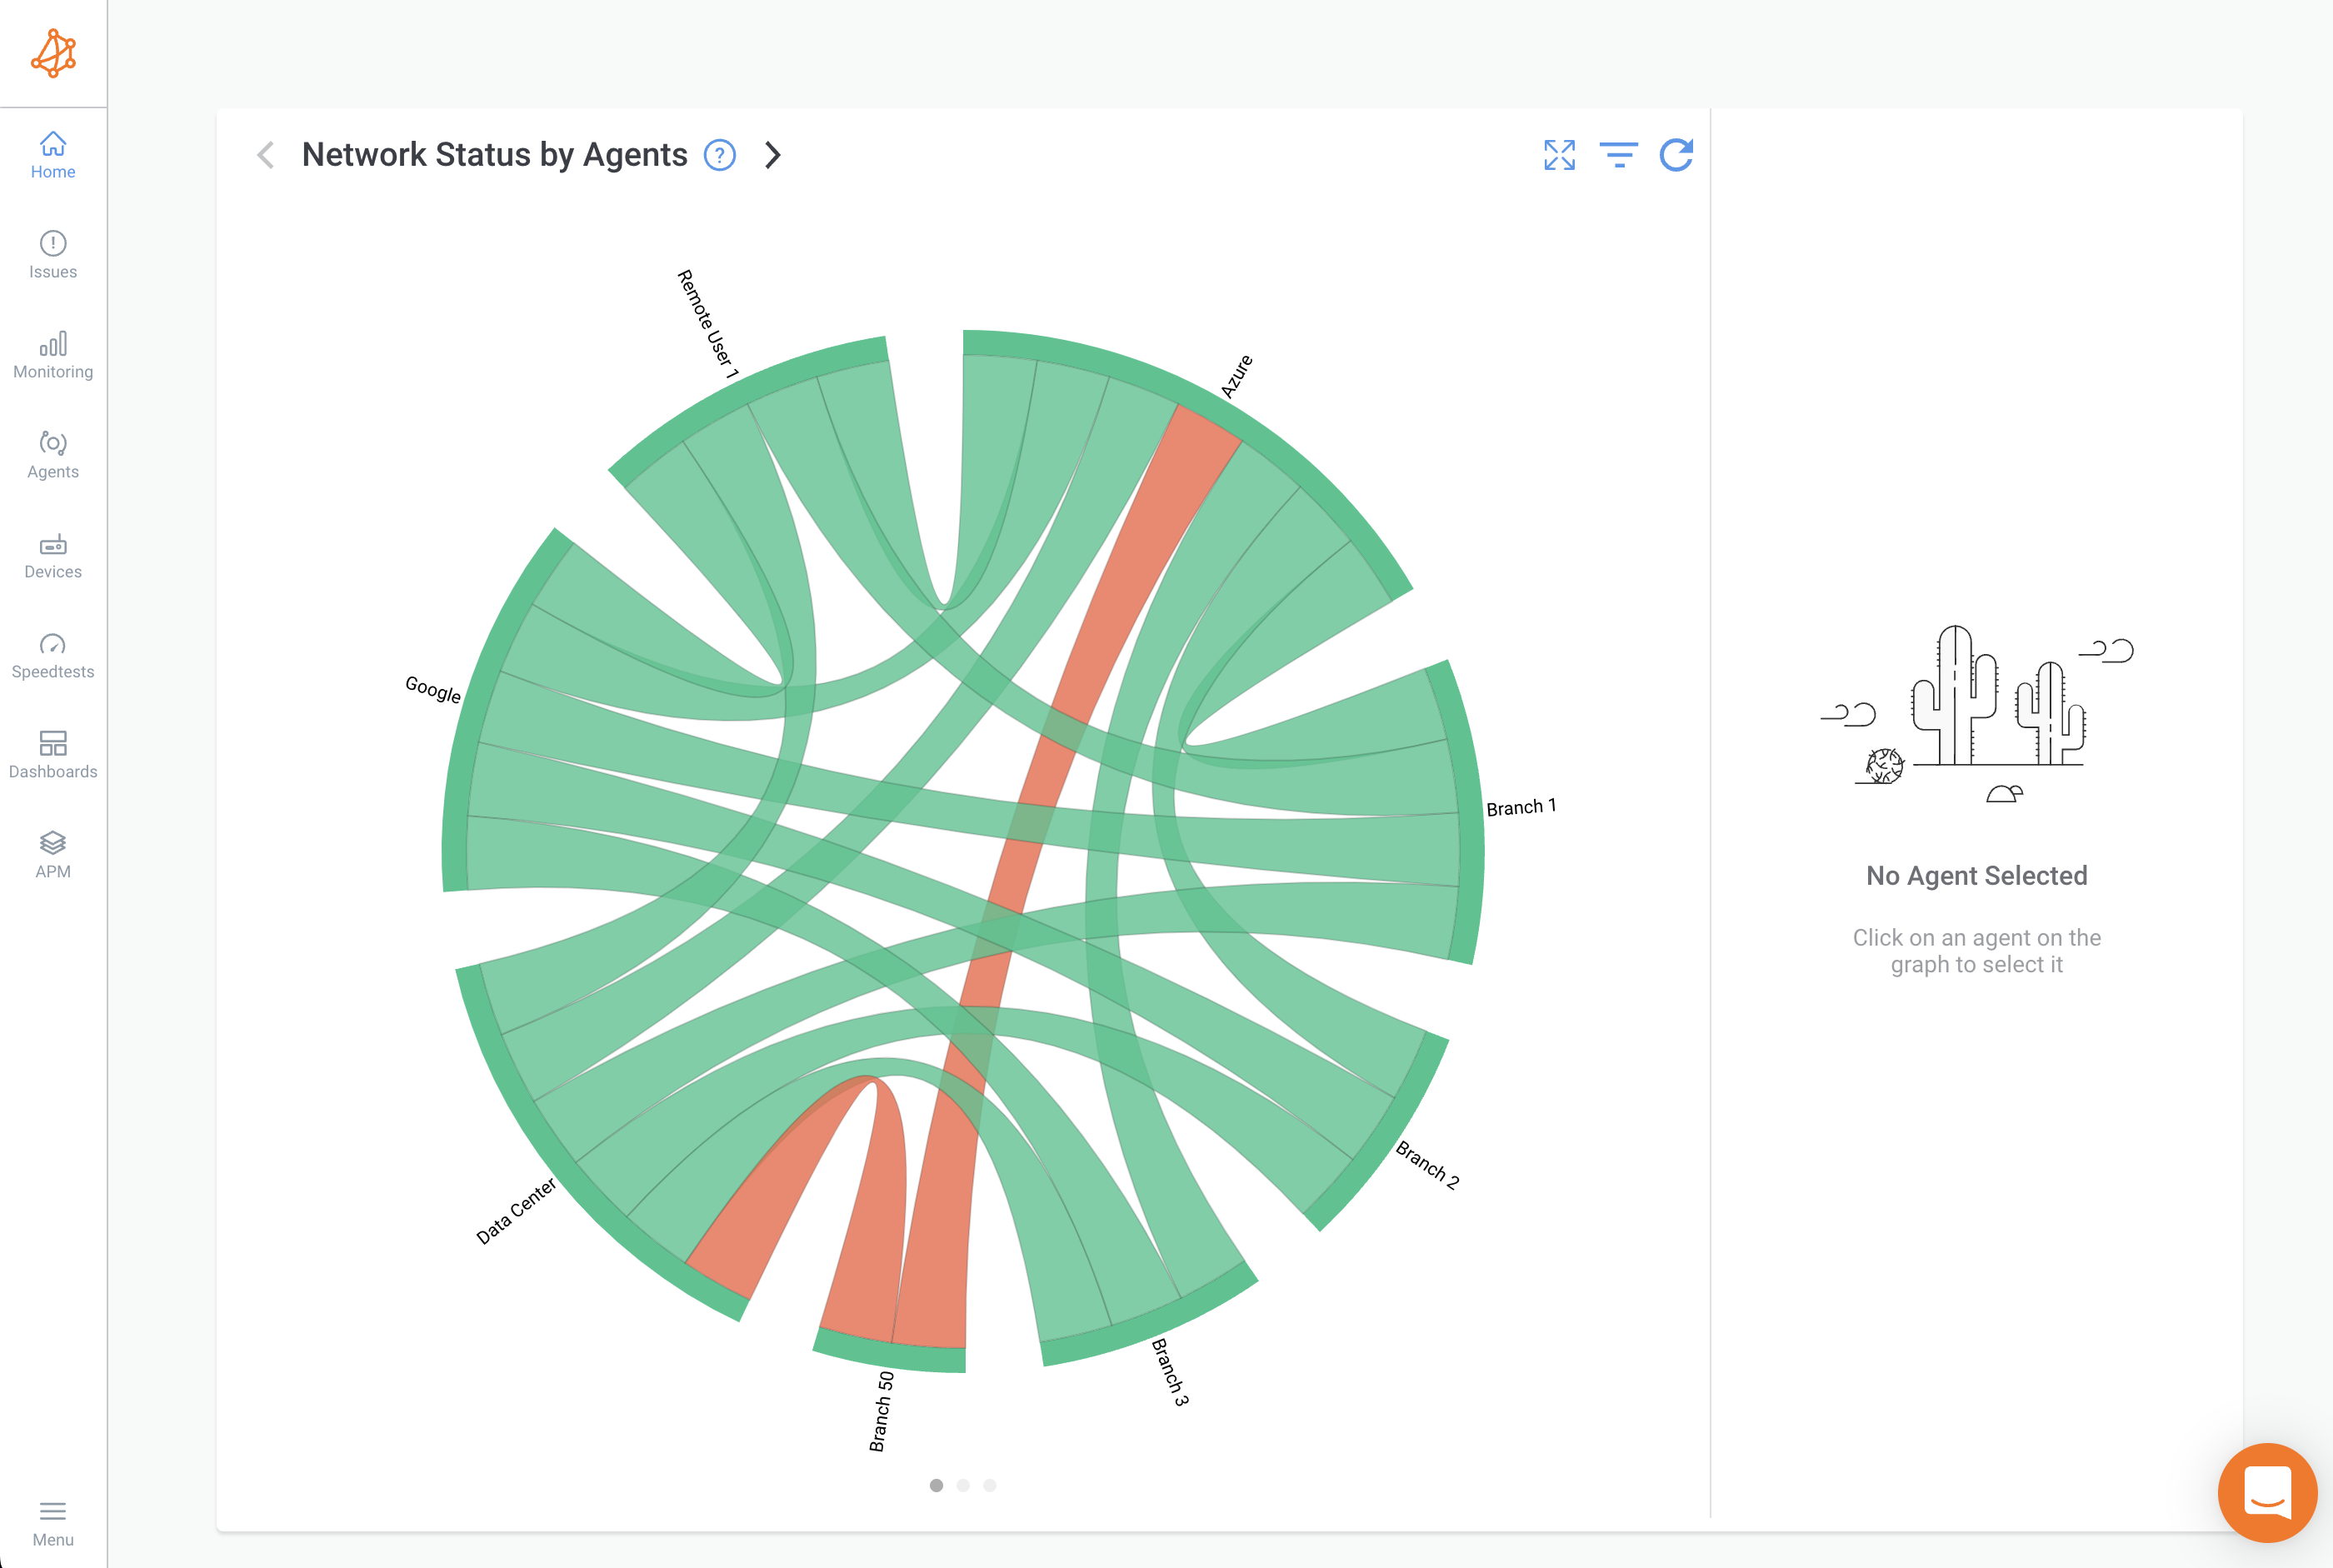 Obkio Network Performance Monitoring  - Home Page & Chord Diagram